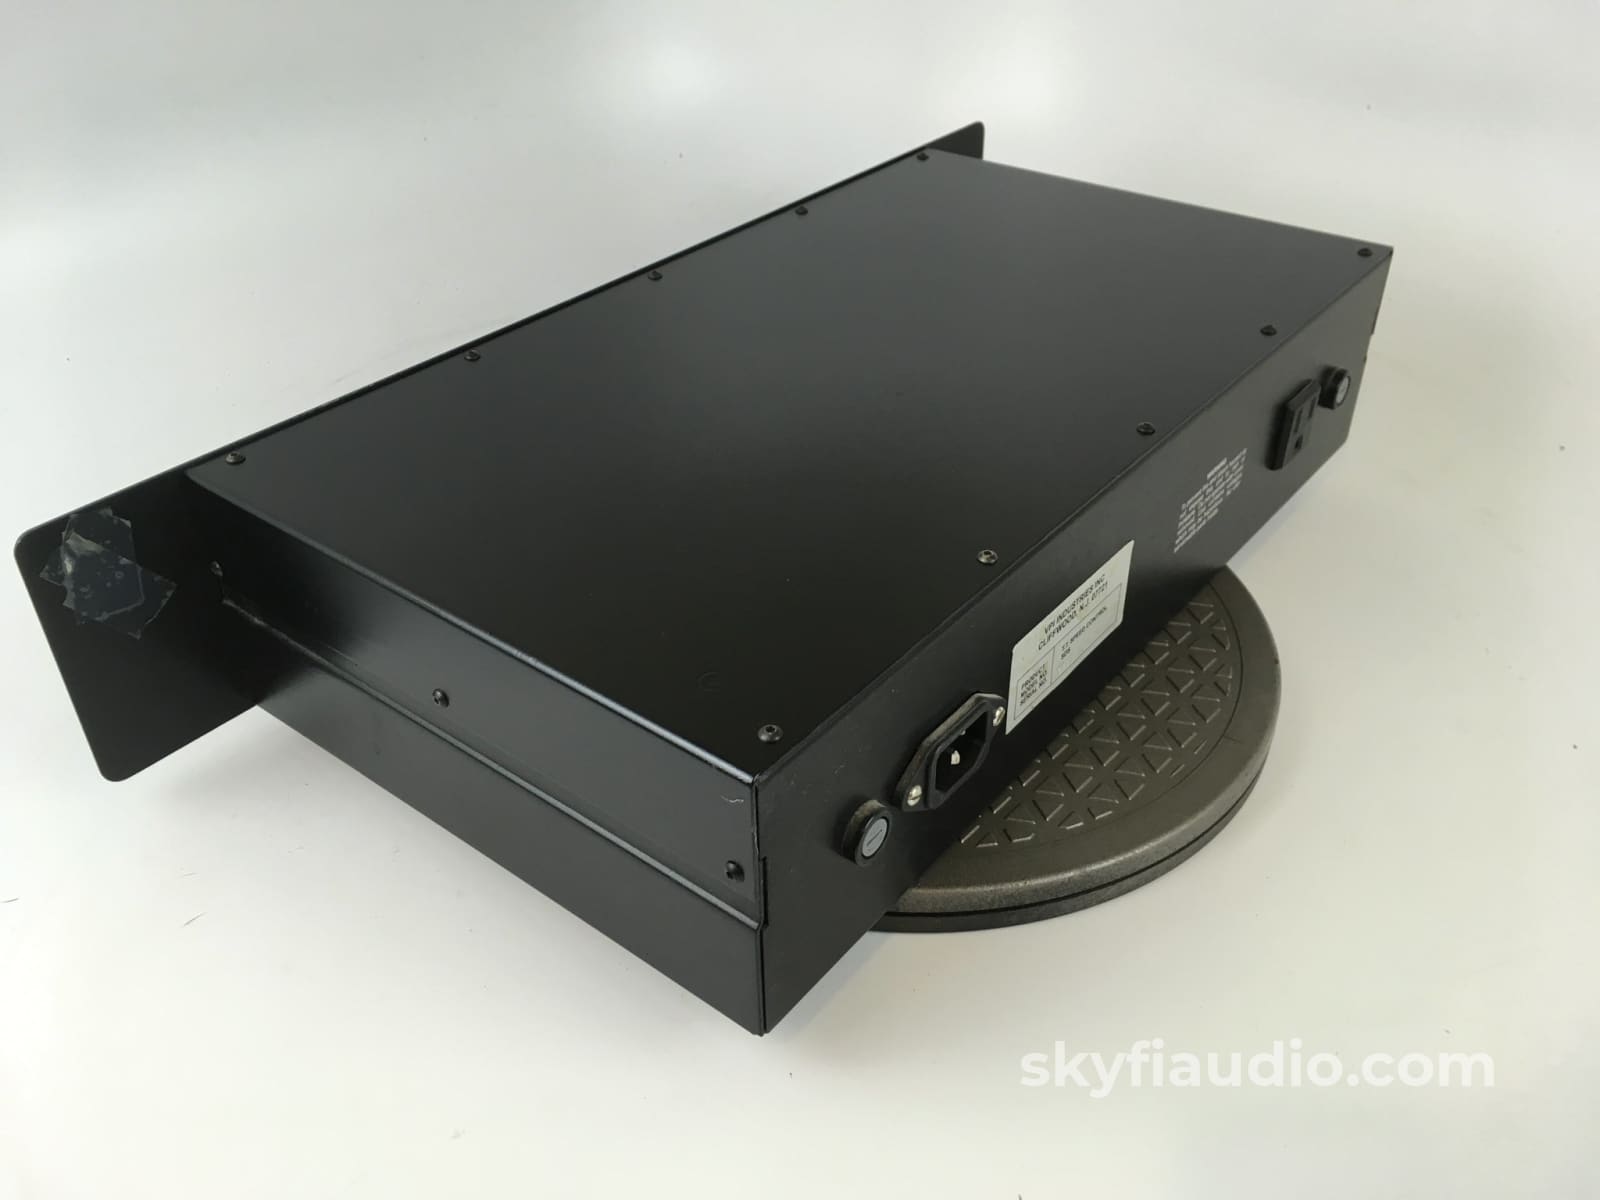 Vpi Sds Synchronous Drive System - Improve Your Table Accessory